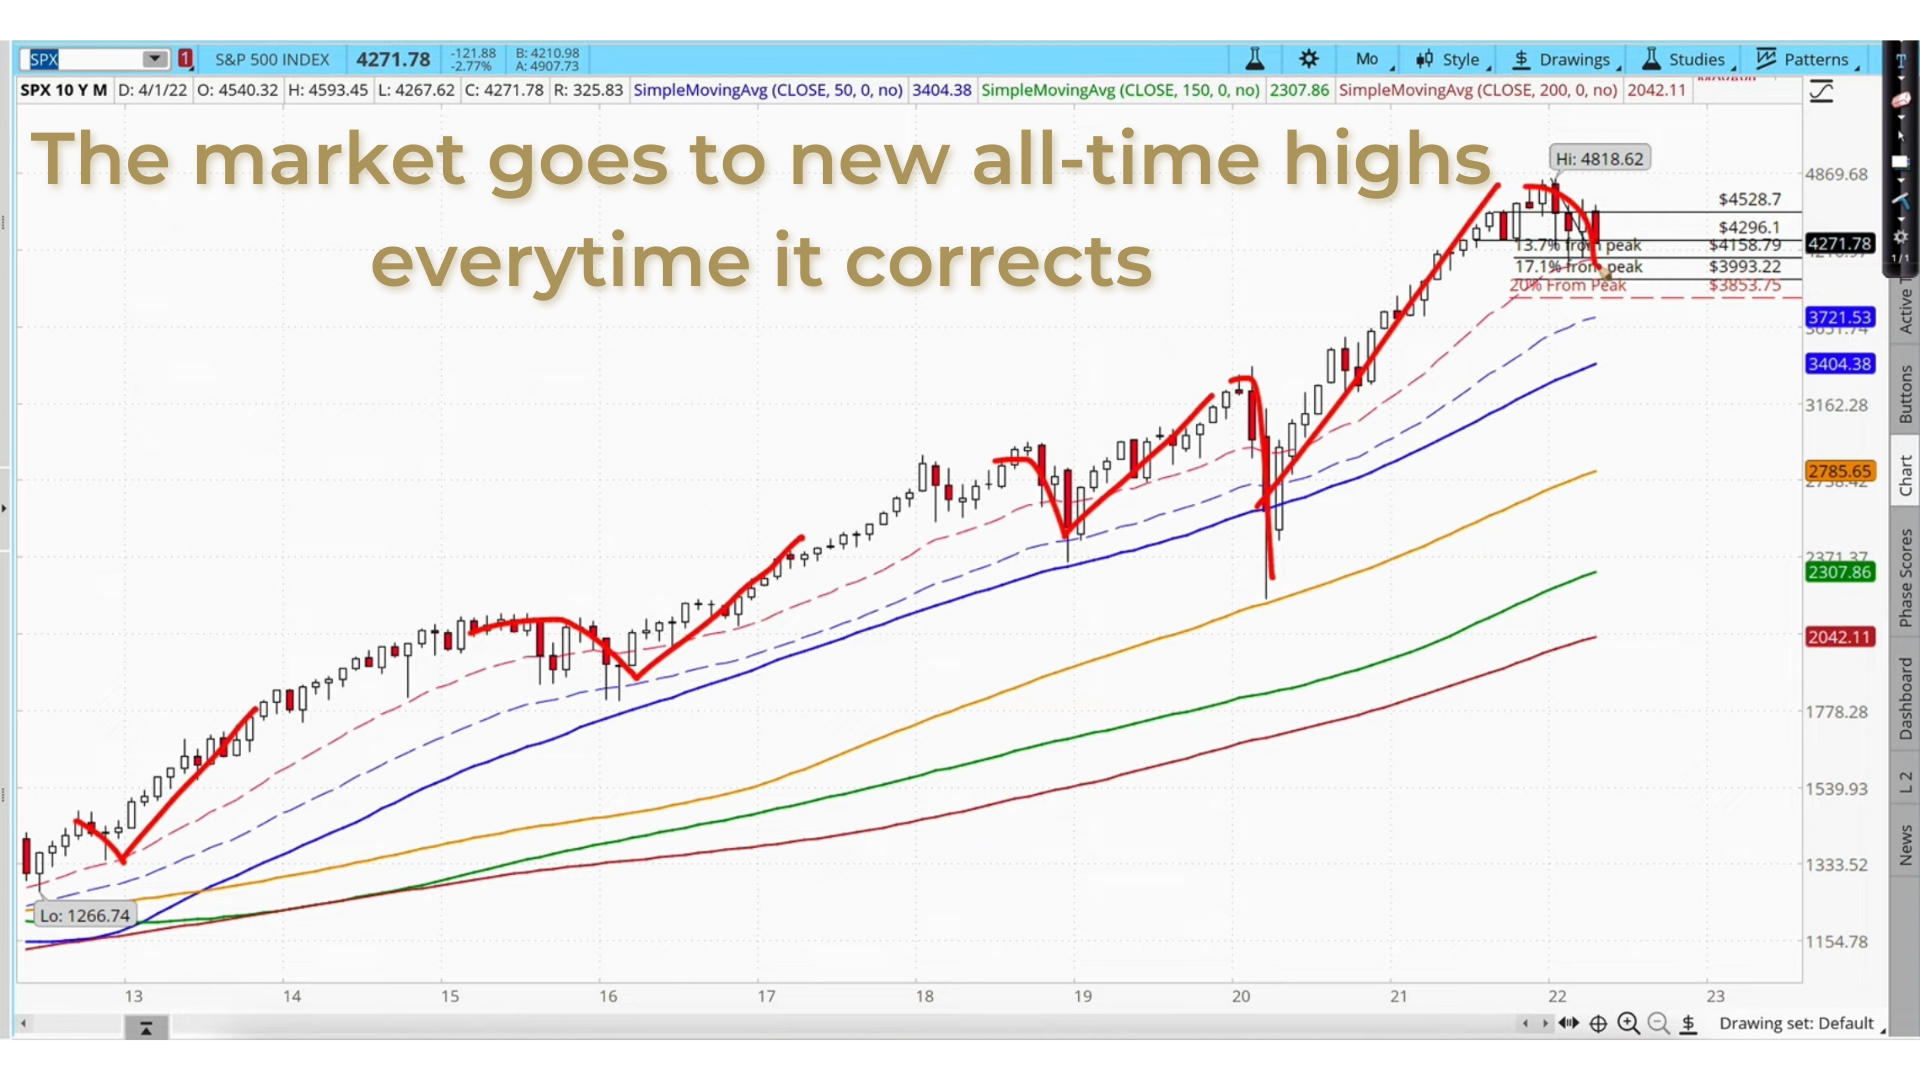 The market goes to new all-time highs everytime it corrects